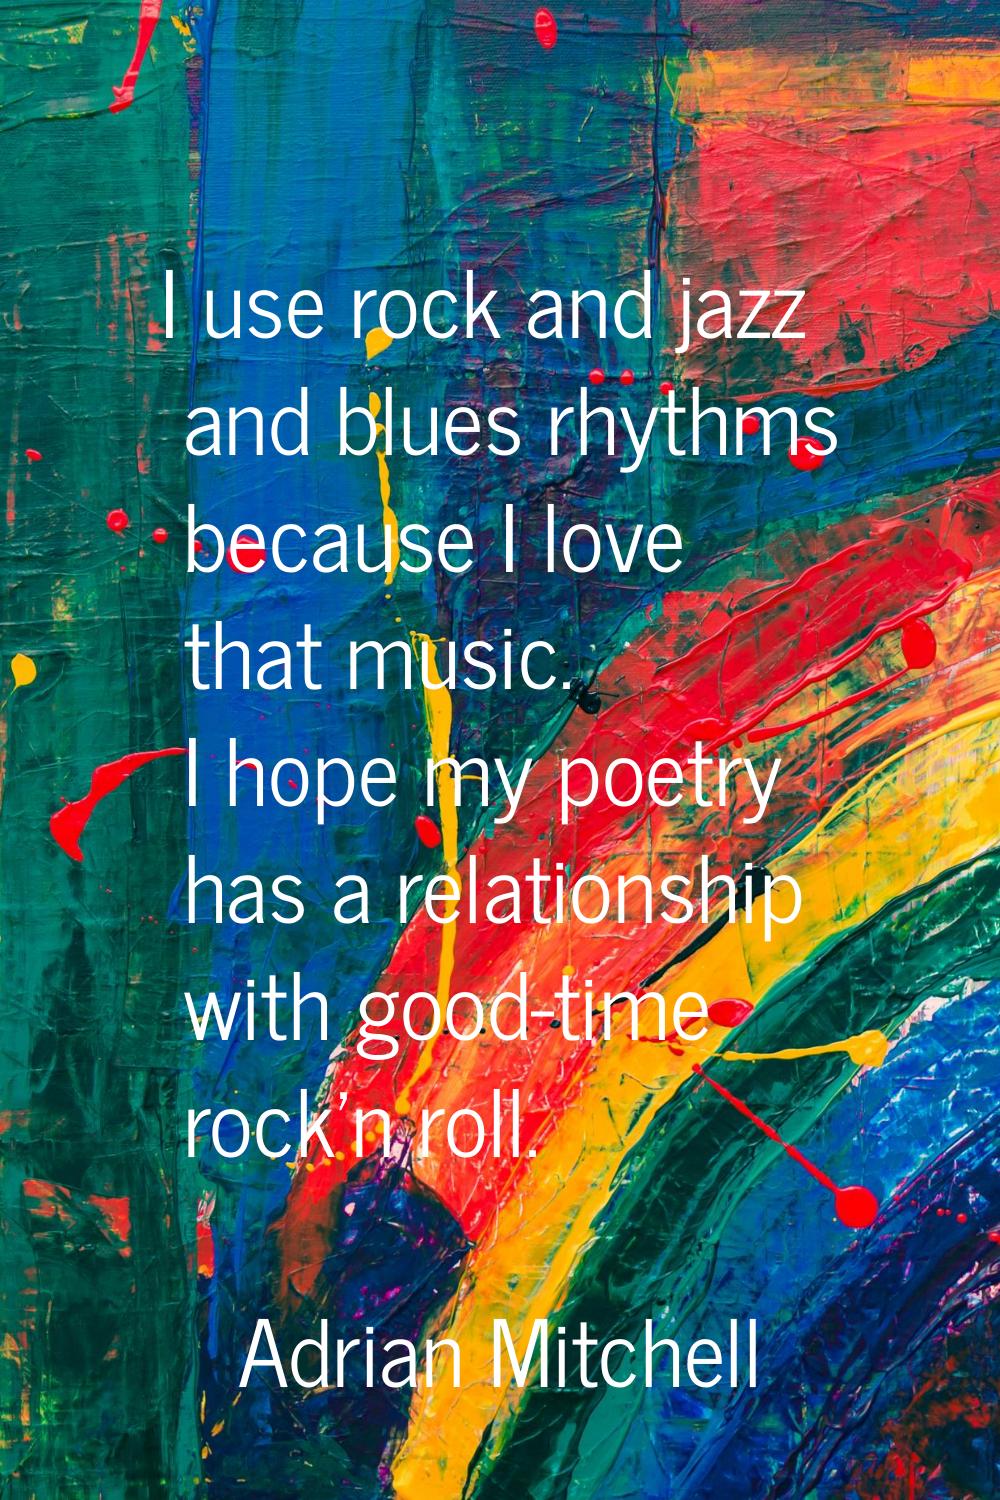 I use rock and jazz and blues rhythms because I love that music. I hope my poetry has a relationshi